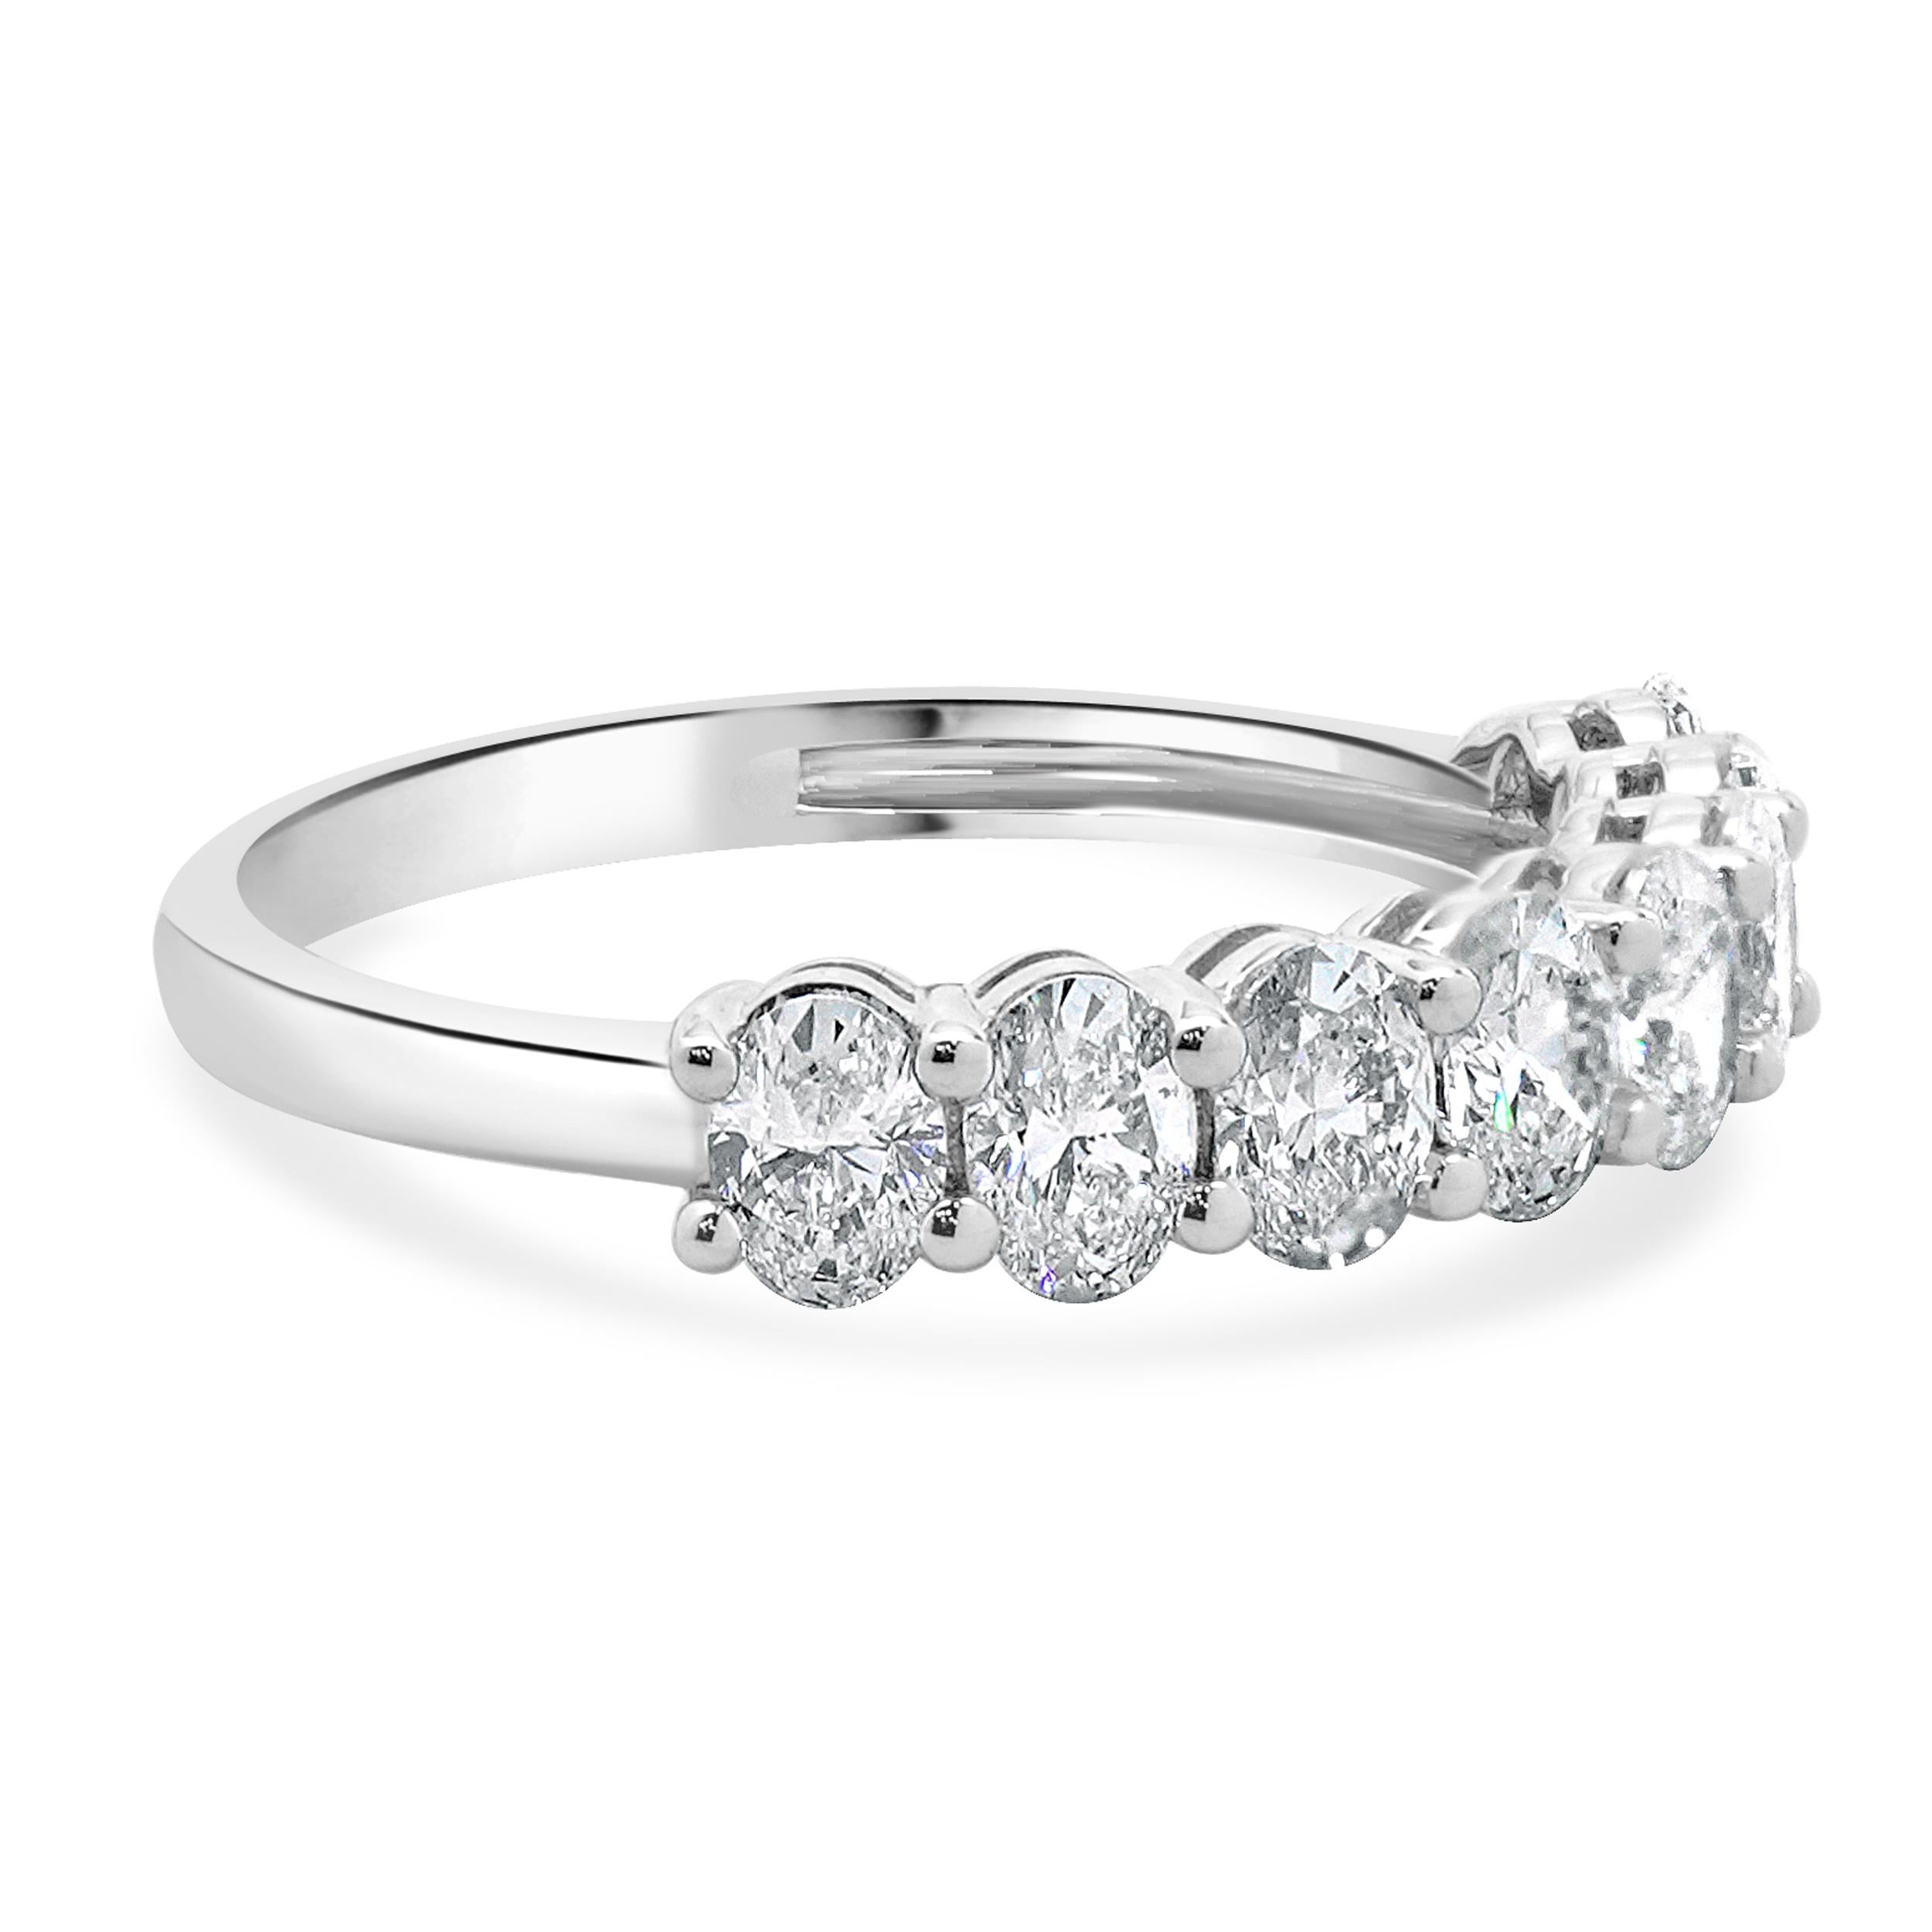 Designer: Custom
Material: 18K white gold
Diamonds: 8 oval cut = 1.28cttw
Color: H / I
Clarity: SI1
Size: 6.5 sizing available 
Dimensions: ring top measures 3mm in width
Weight: 2.54 grams
